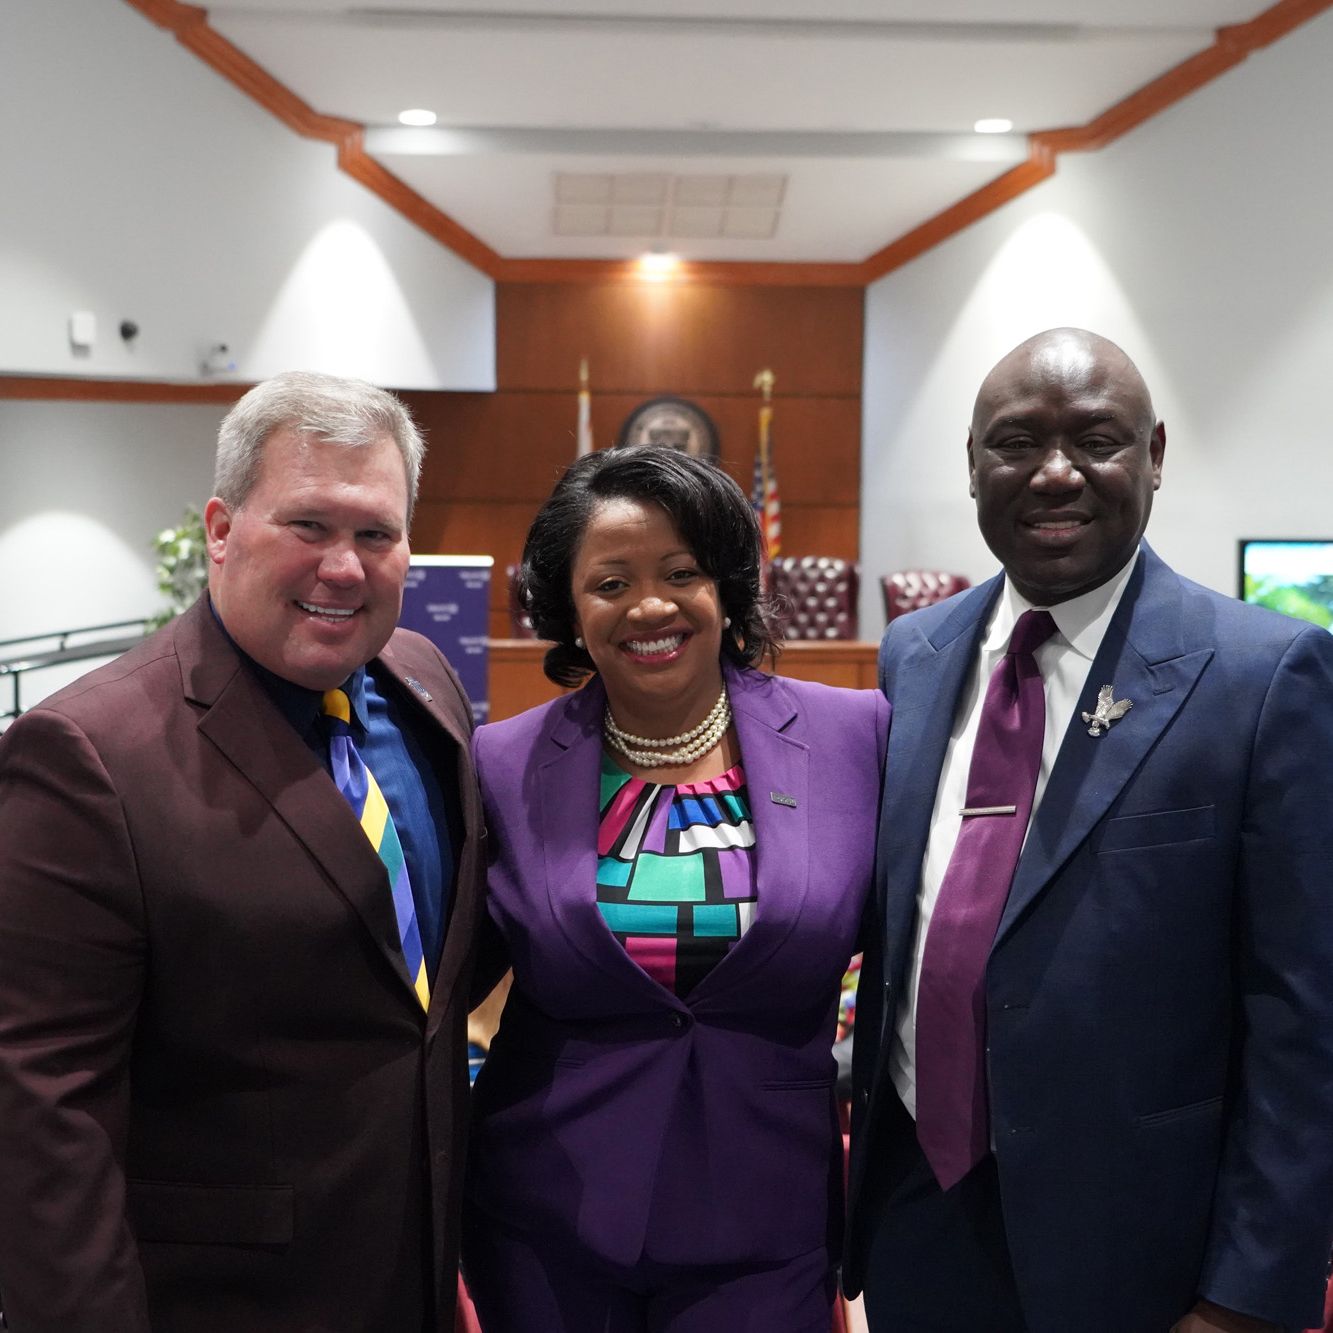 Benjamin Crump (right) with STU President David A. Armstrong, J.D. (left), and Truist Chief DE&I Officer  Cindy McSweeney (center)